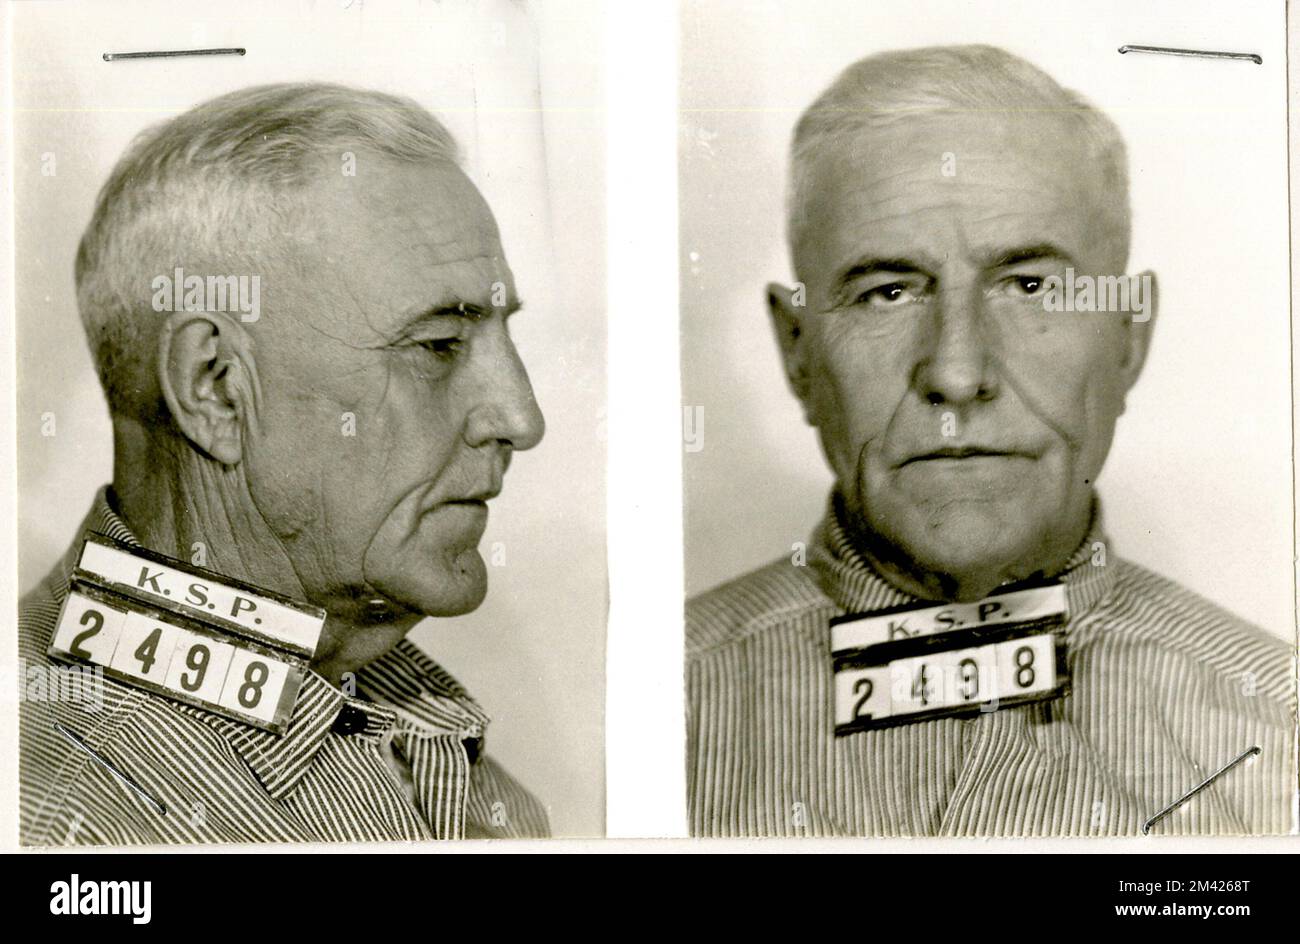 Photograph of Lyman Ford. This item is the prison photograph, also known as the 'mug shot,' of Leavenworth inmate Lyman Ford, register number 27683. Bureau of Prisons, Inmate case files. Stock Photo